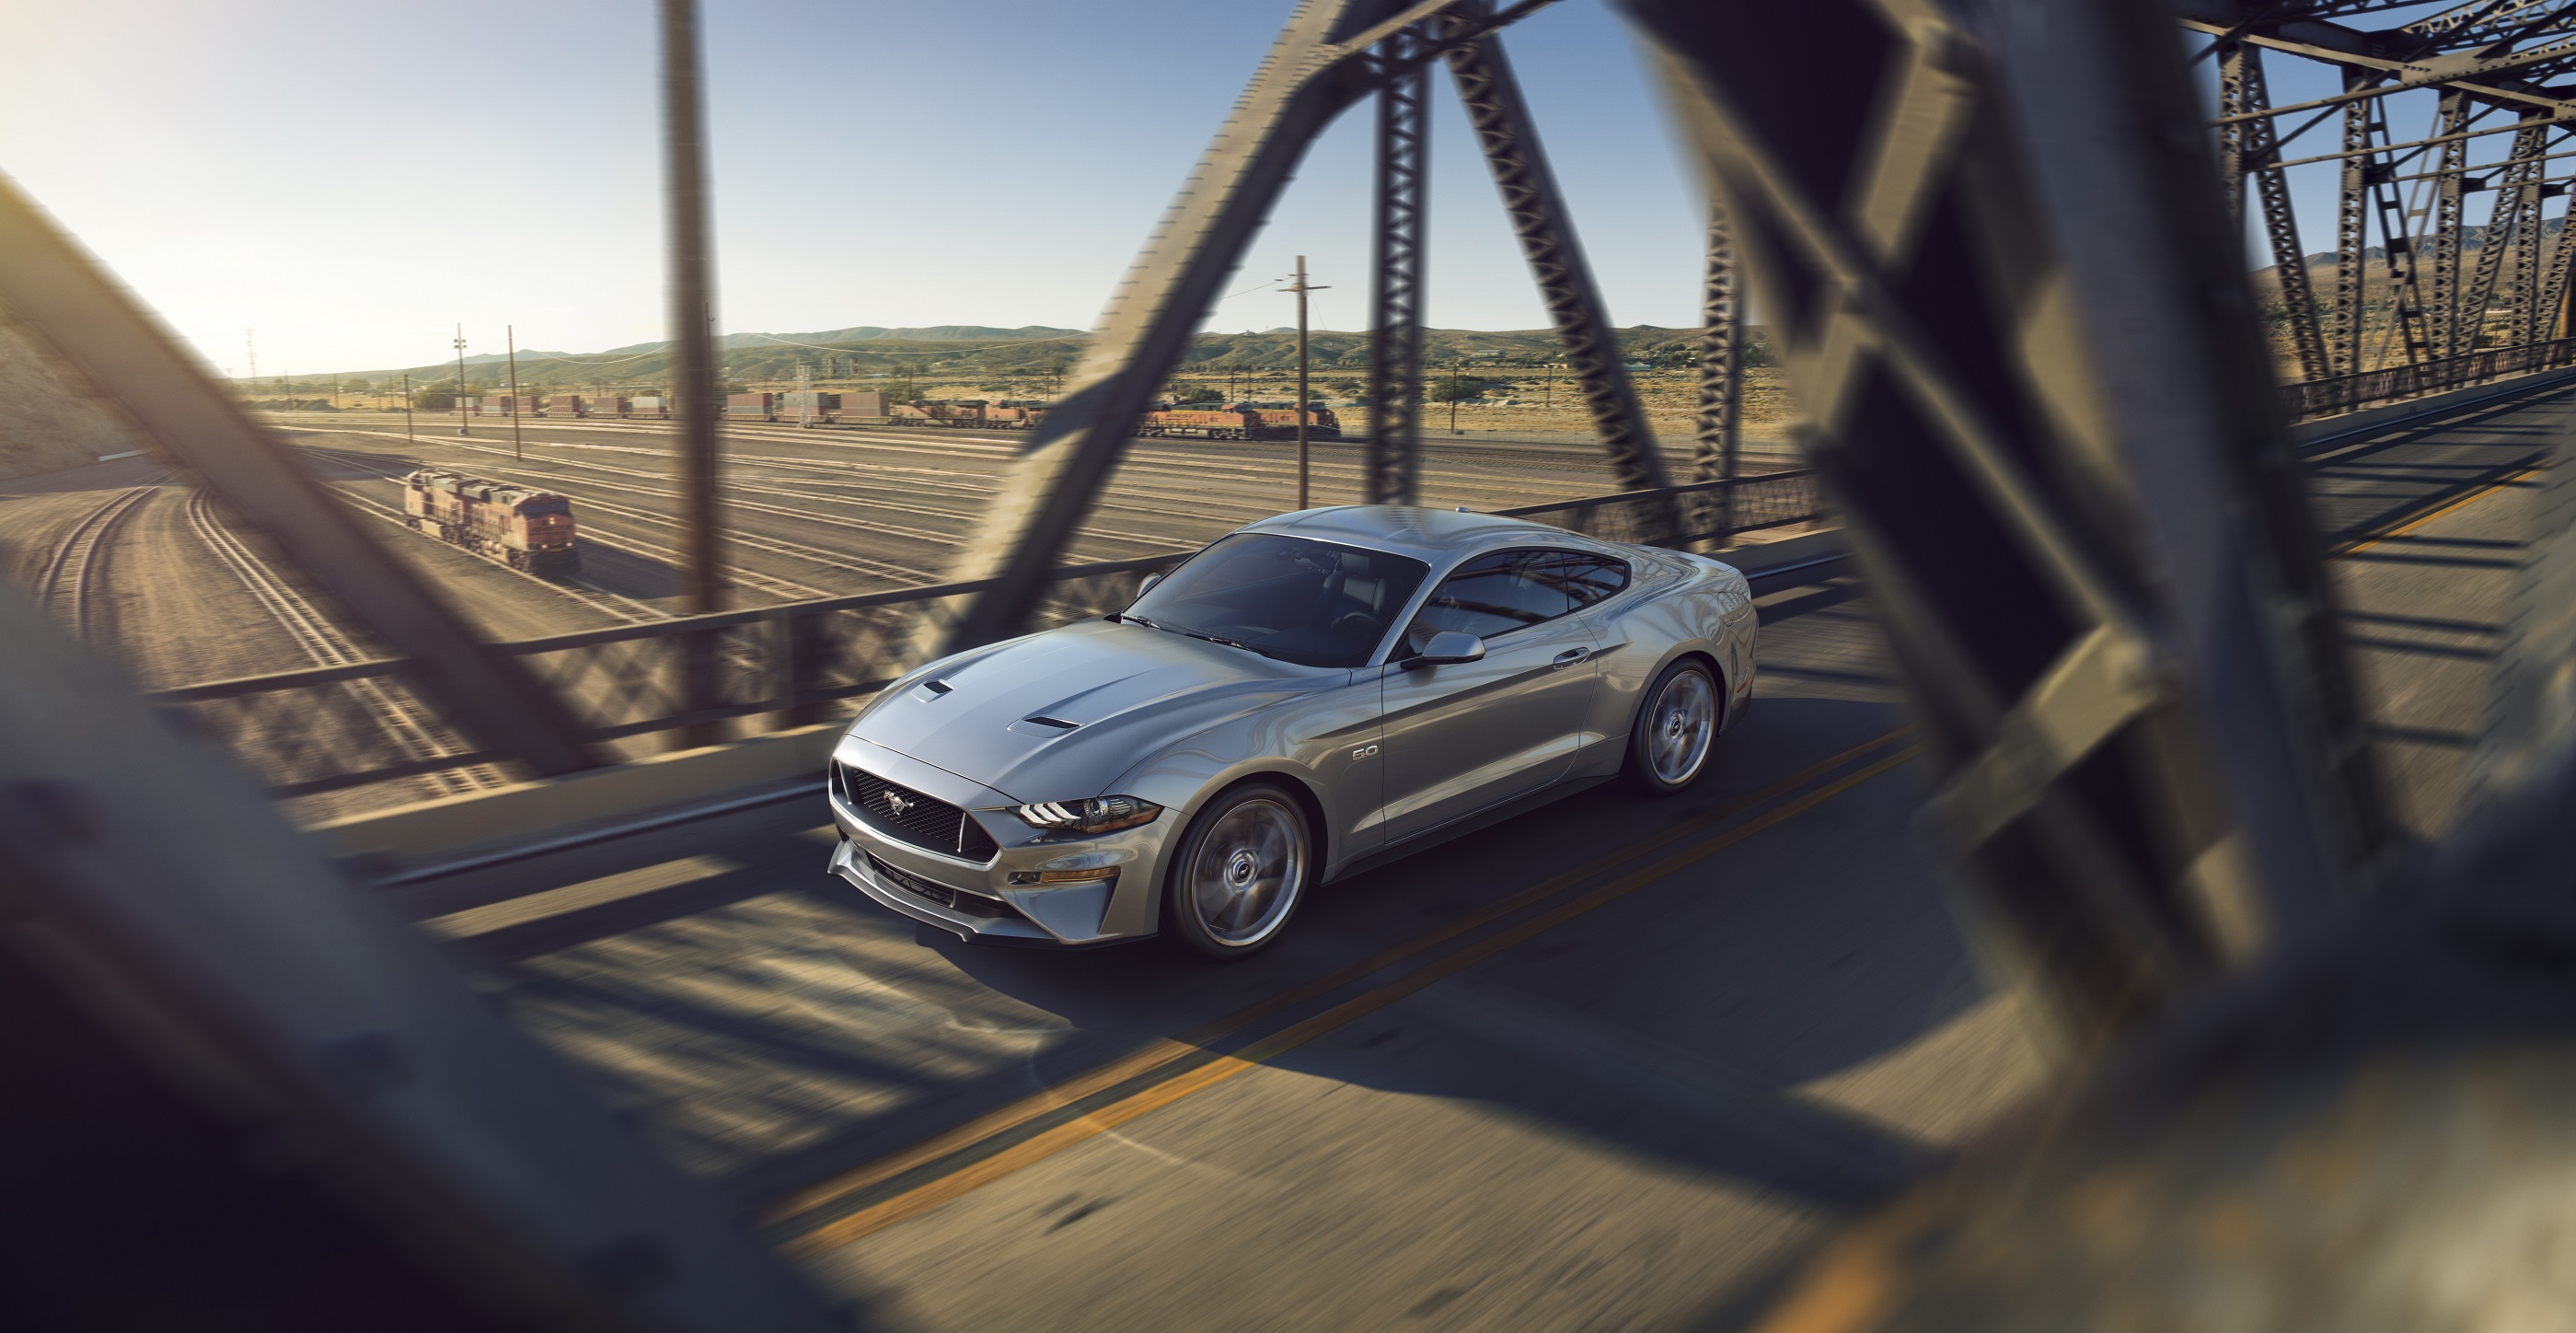 New-Ford-Mustang-V8-GT-with-Performace-Pack-in-Ingot-Silver.jpg